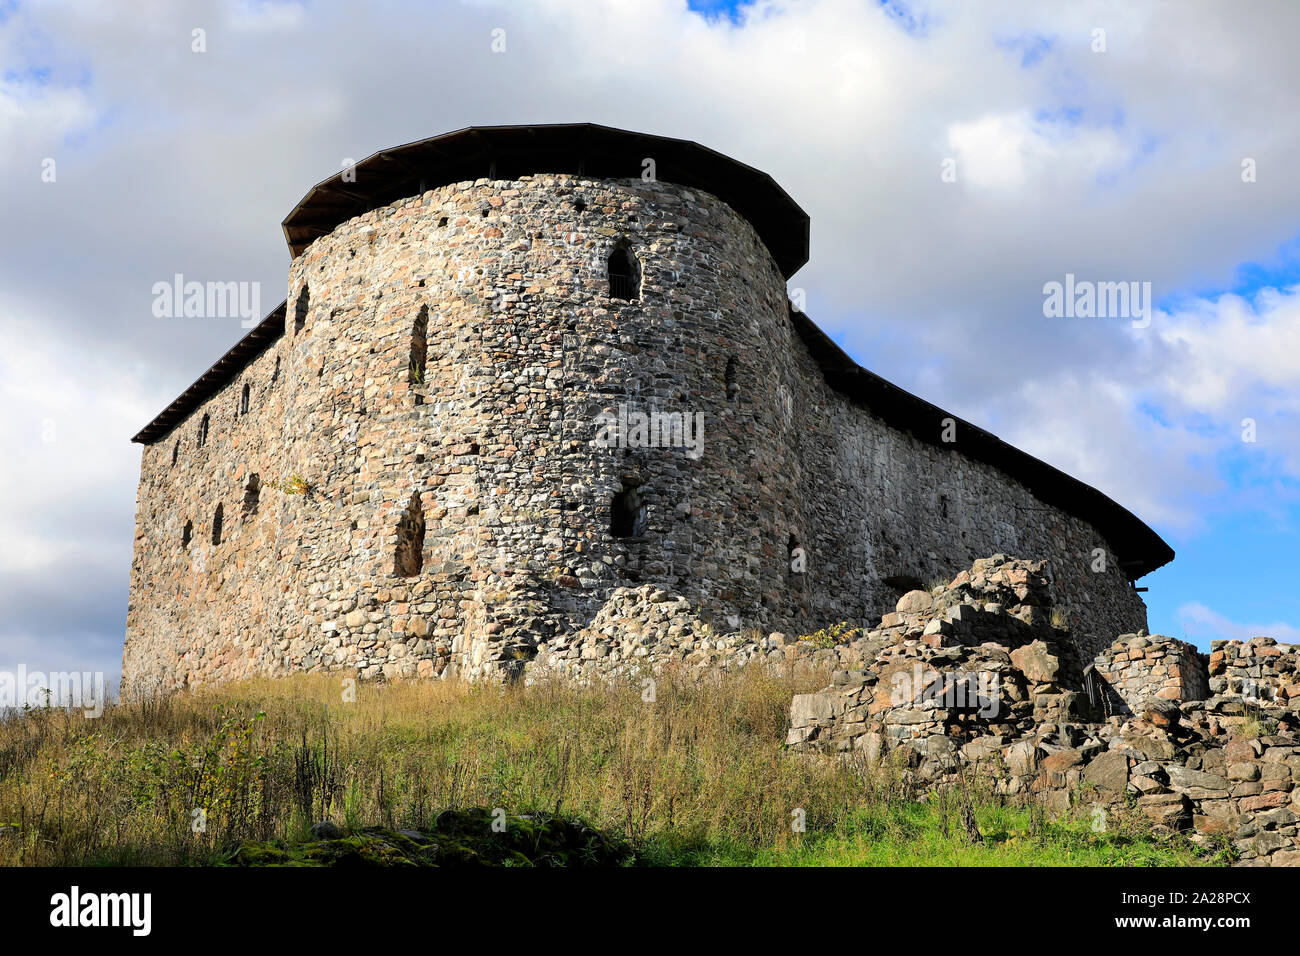 Medieval Raseborg Castle Ruins against sky. Raseborg Castle was built in 1370s on a rock that was surrounded by water at the time. Stock Photo